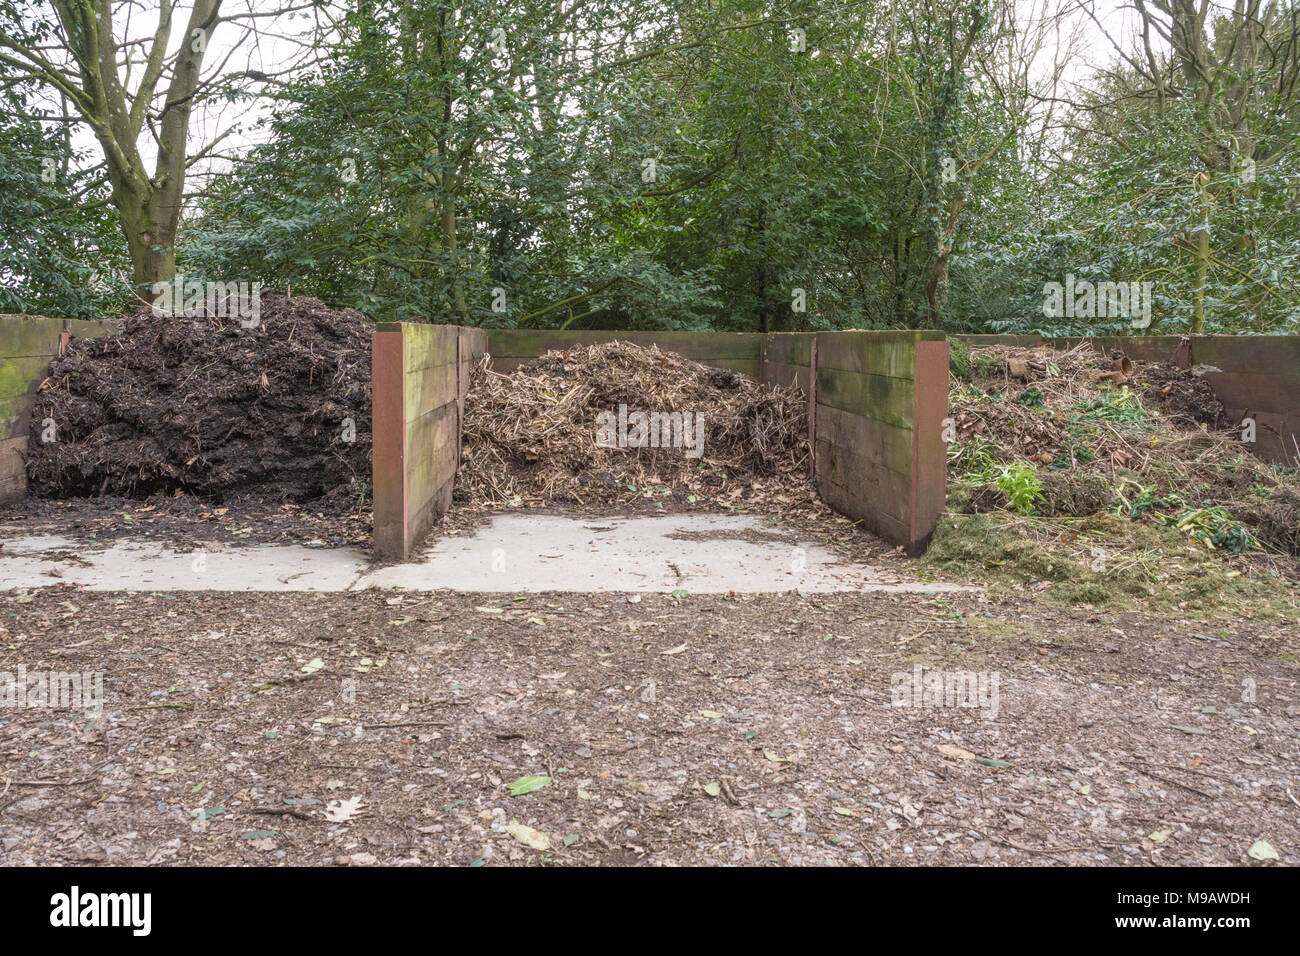 Composting - heaps of compost at different stages of the process Stock Photo